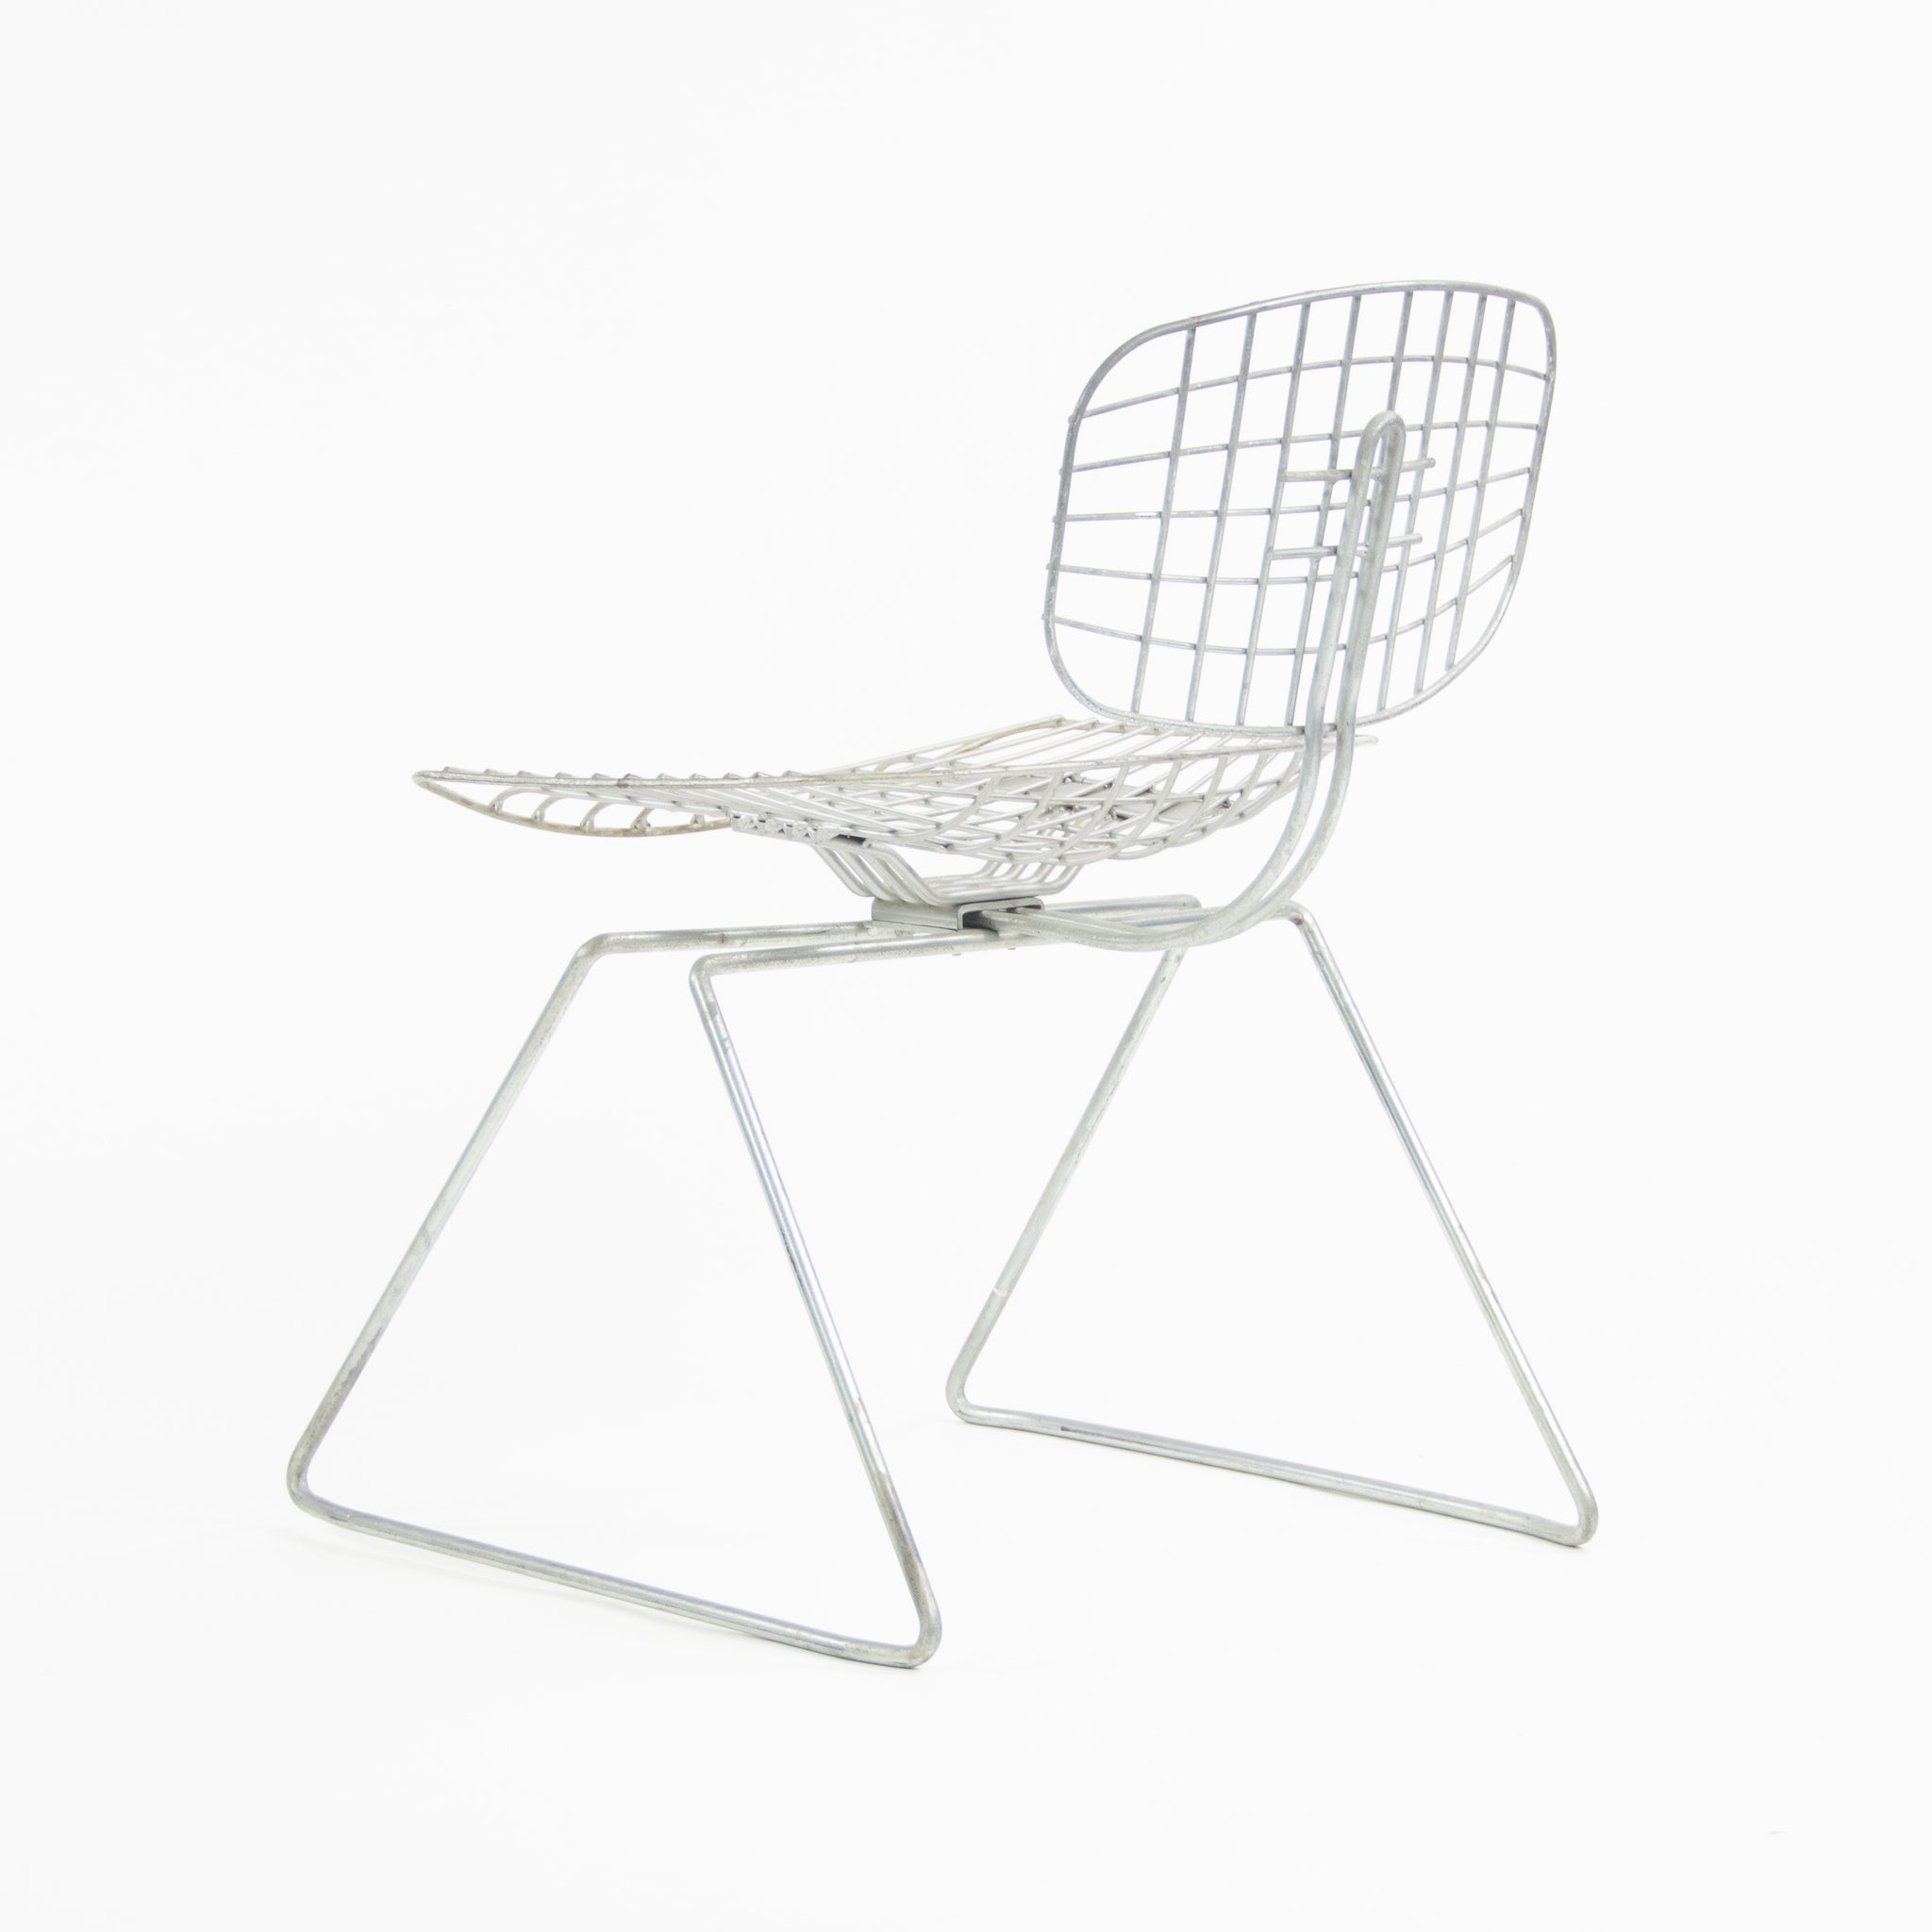 SOLD 1976 Michel Cadestin and Georges Laurent Beaubourg Chair Teda France Pompidou